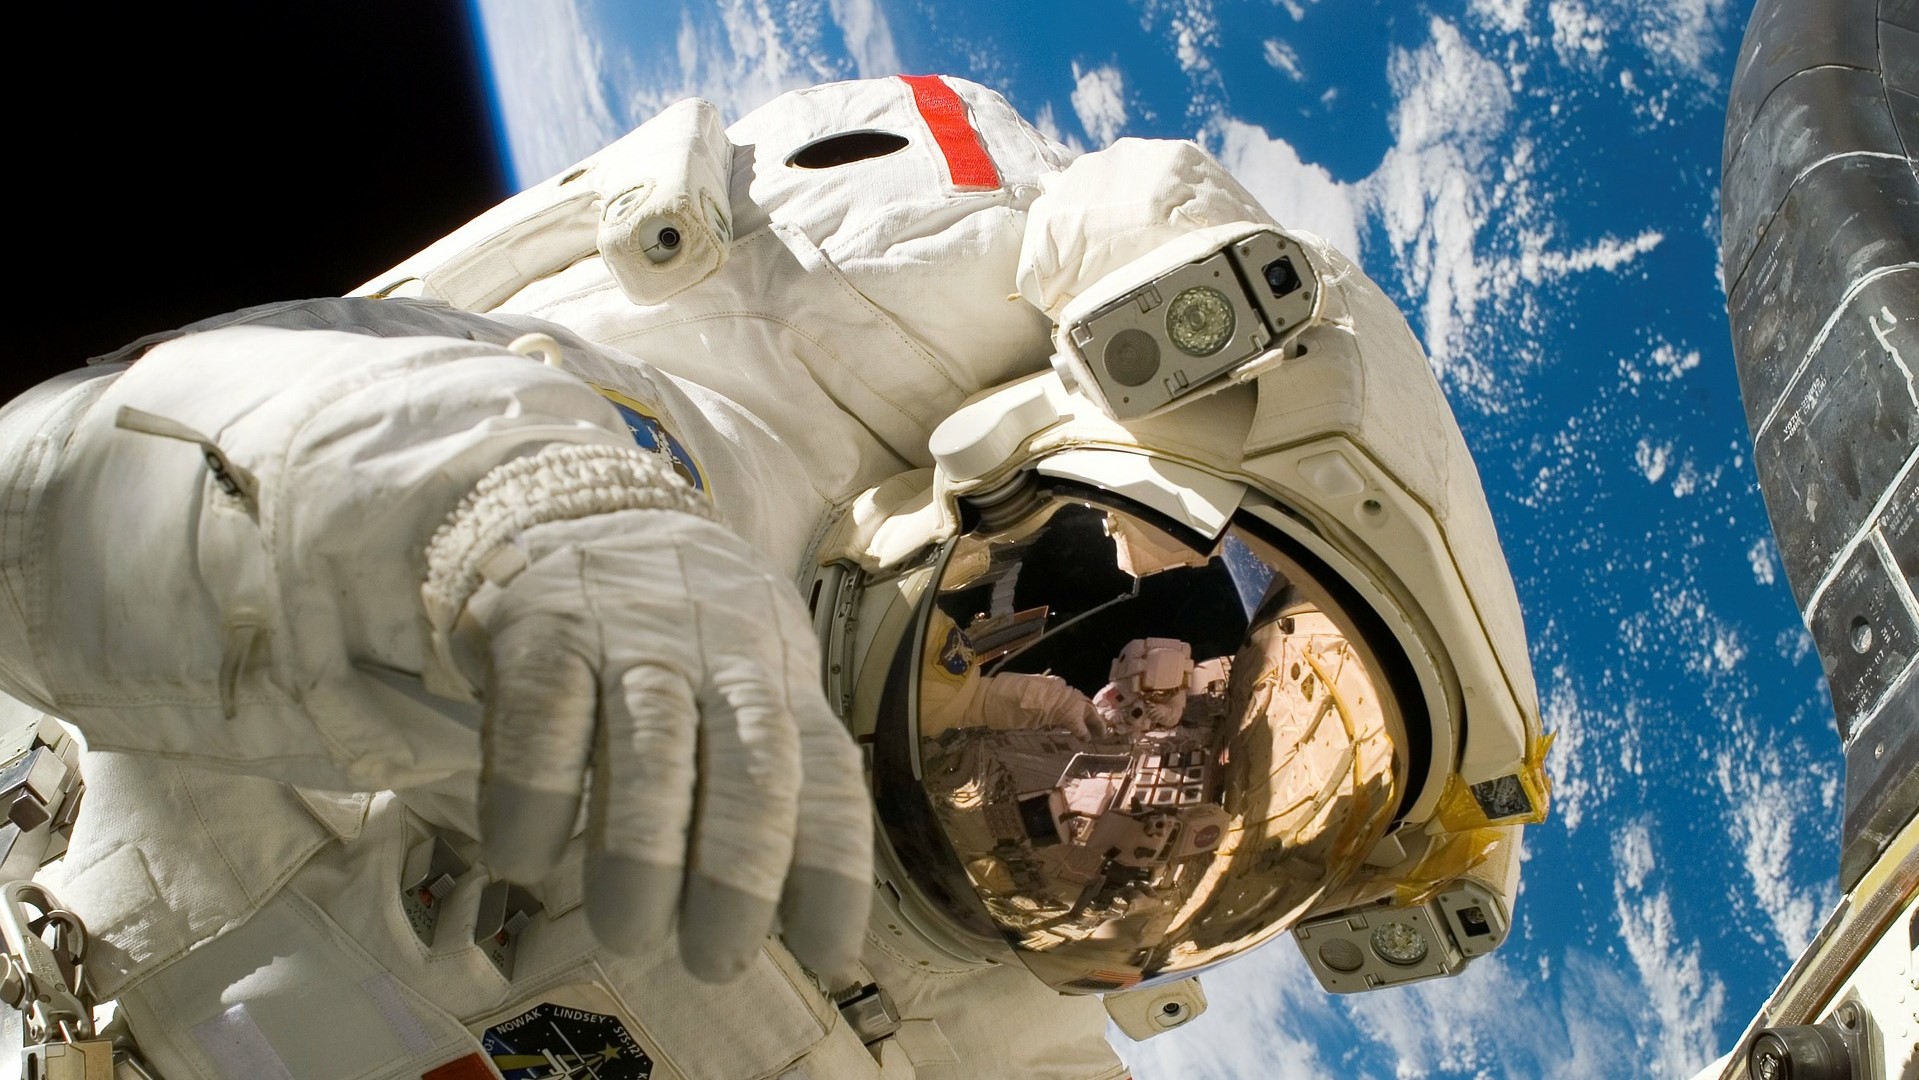 Hungary to Send Astronaut to ISS by 2025 